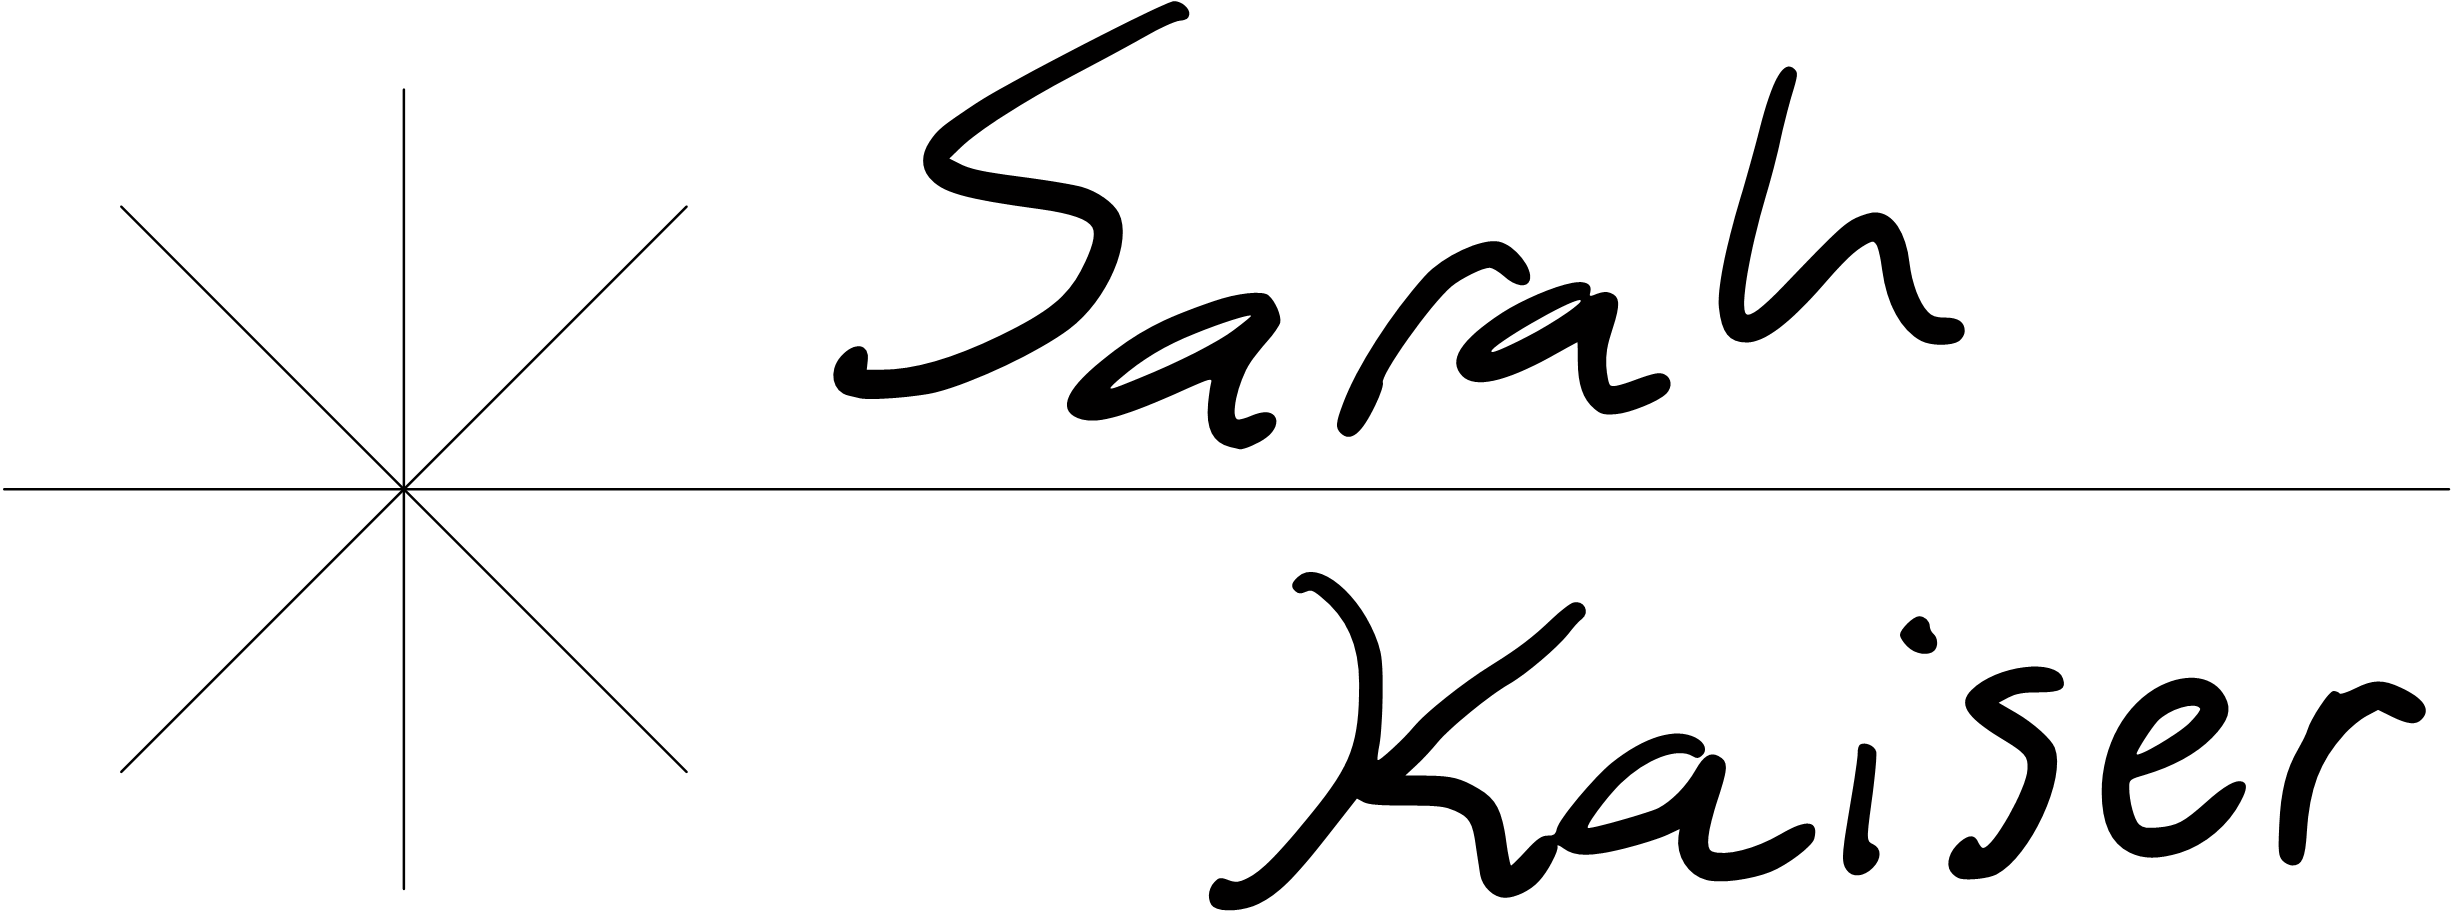 OneNote signature with straight lines